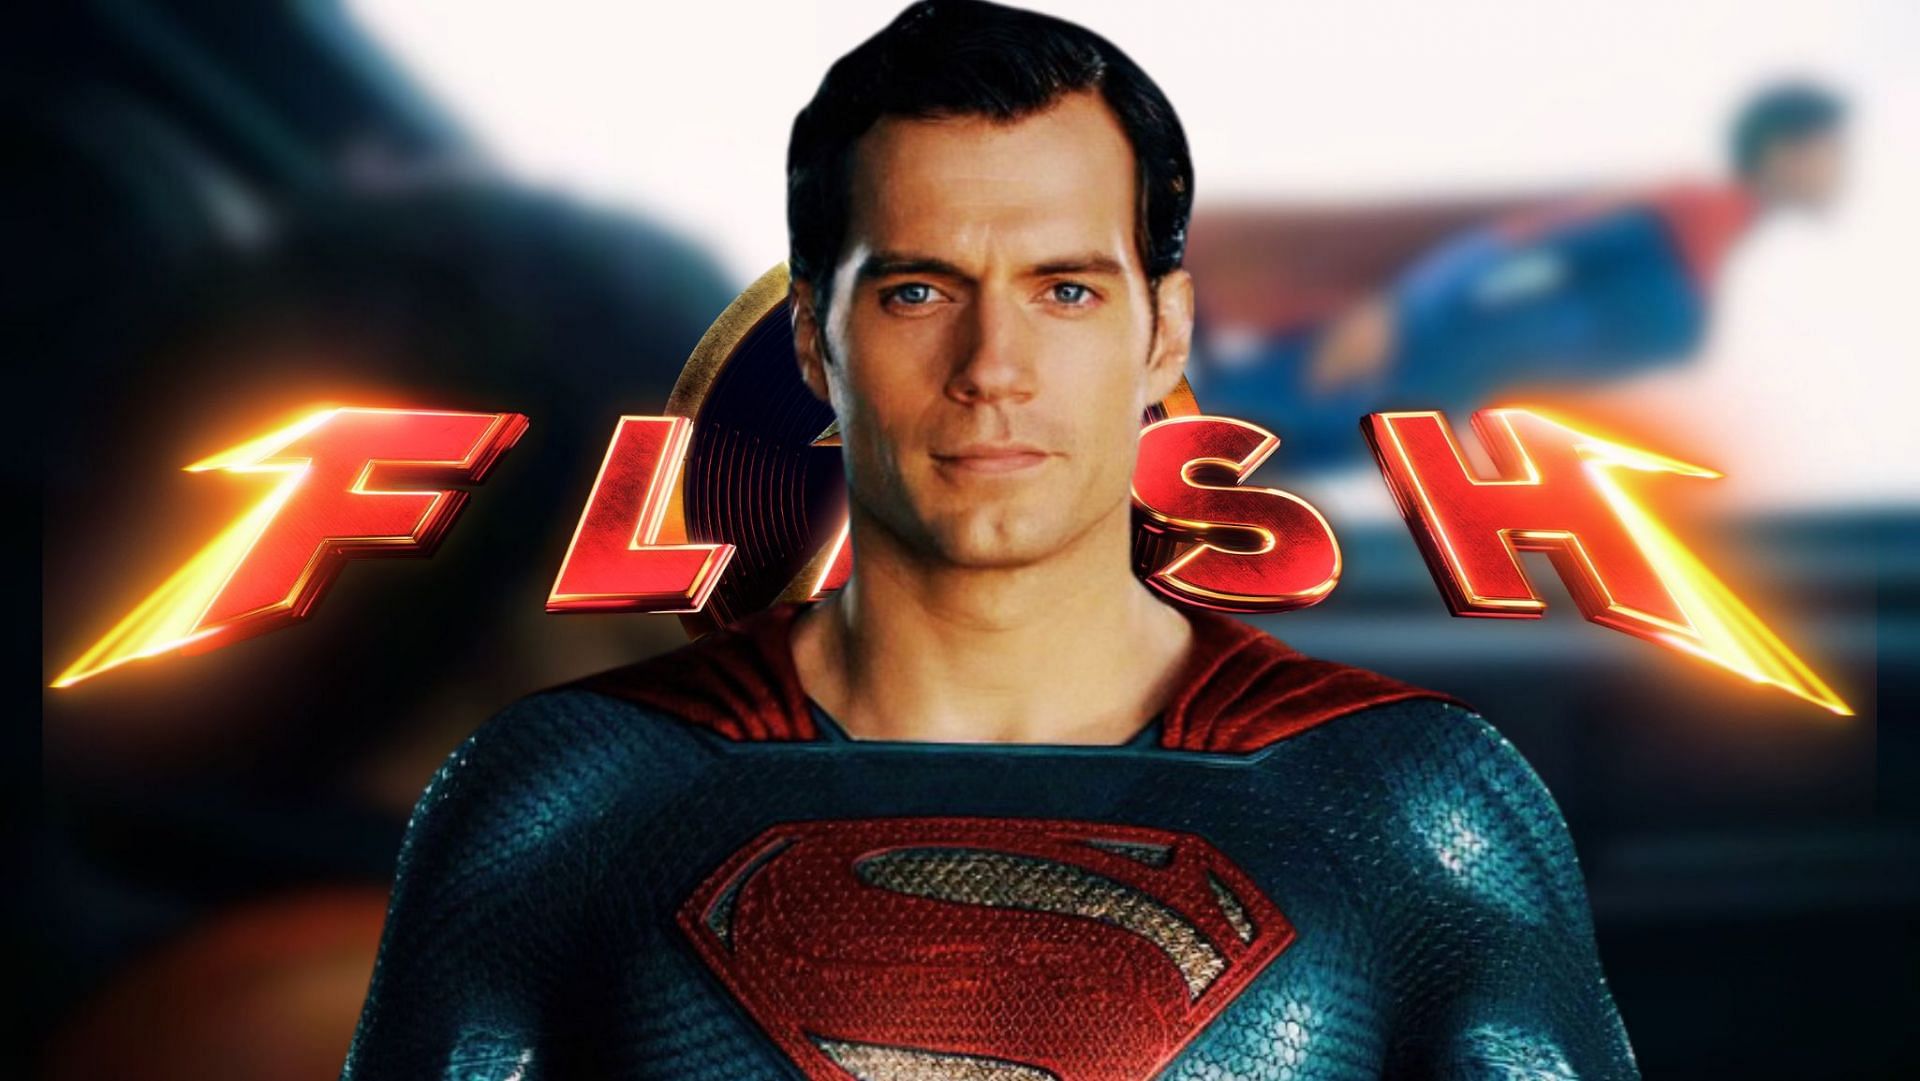 Henry Cavill's Superman takes flight in The Flash, teasing uncertain future  for DCEU